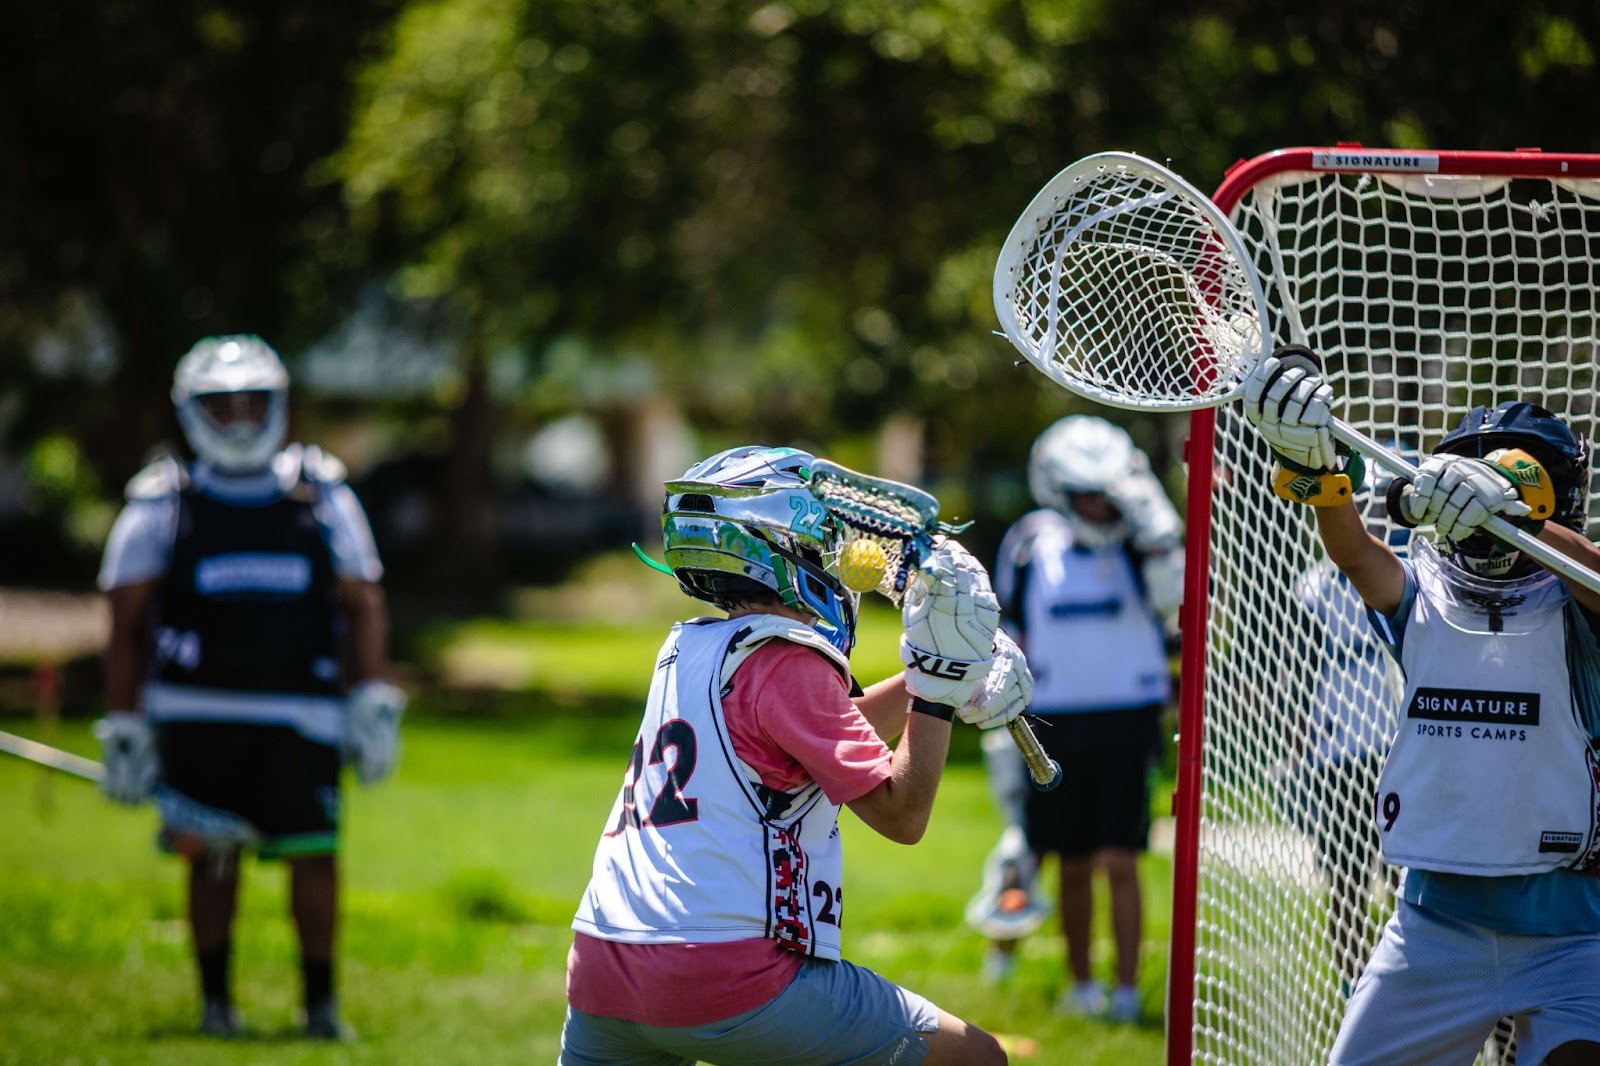 Two lacrosse players engaged in a game during summer sports camp